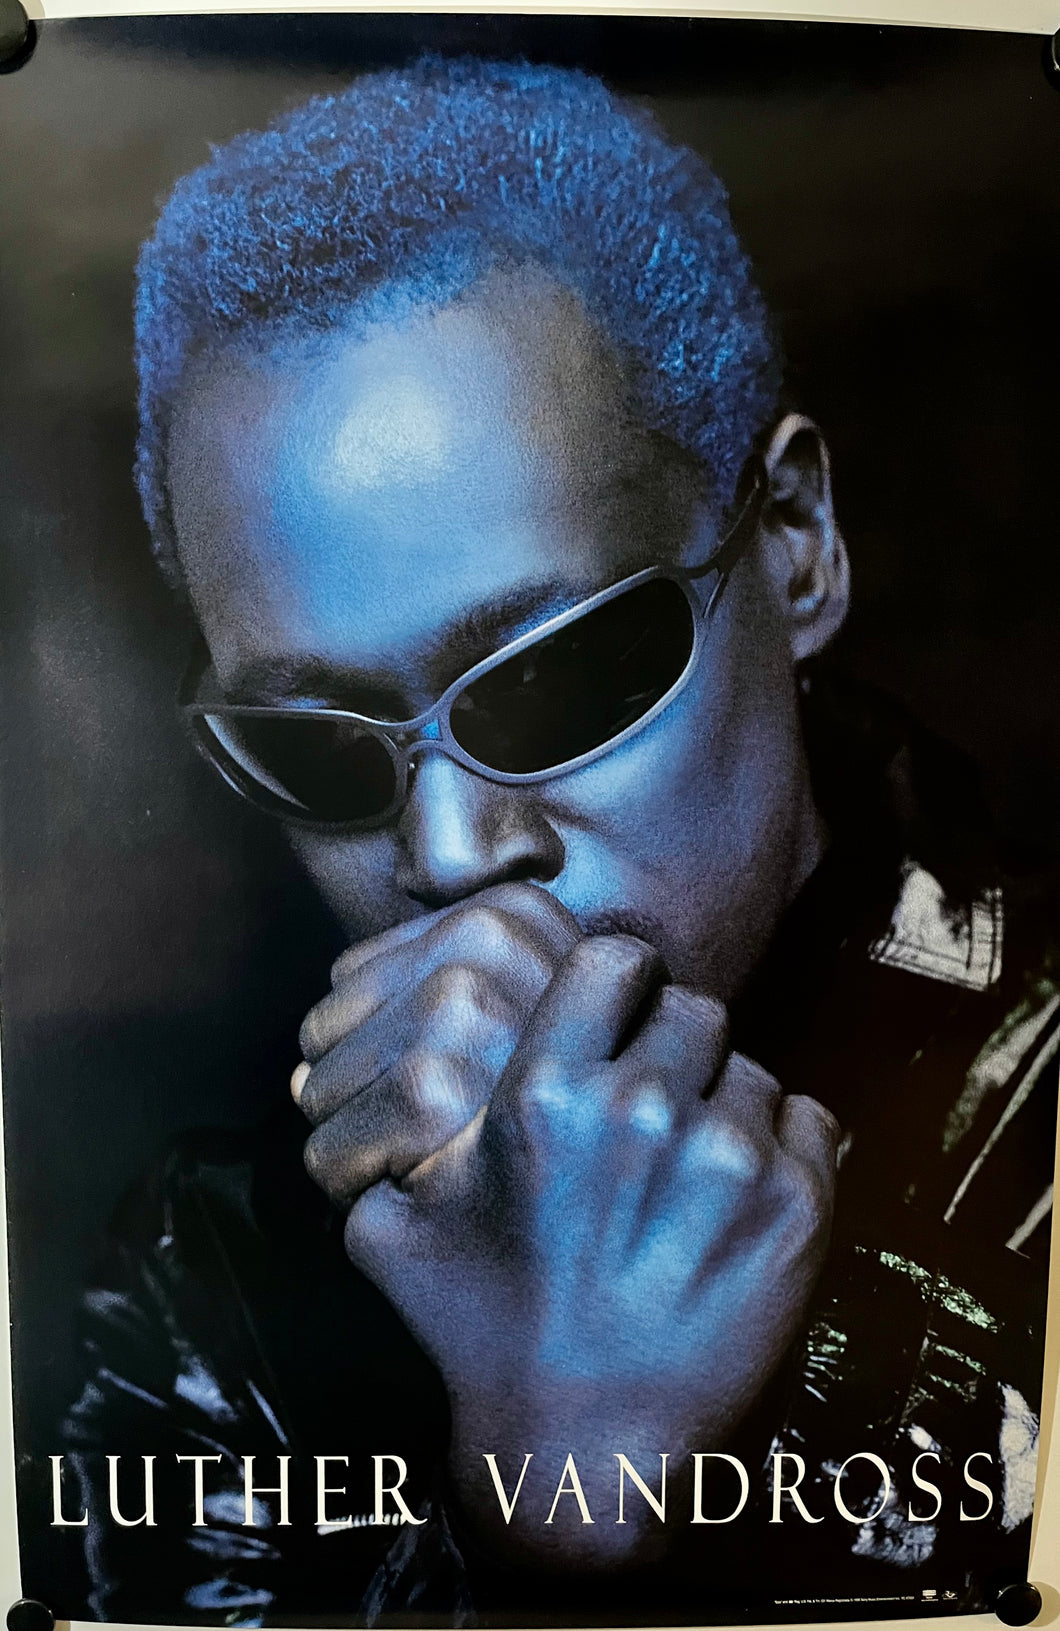 Luther Vandross - 24” x 36” Promotional Poster